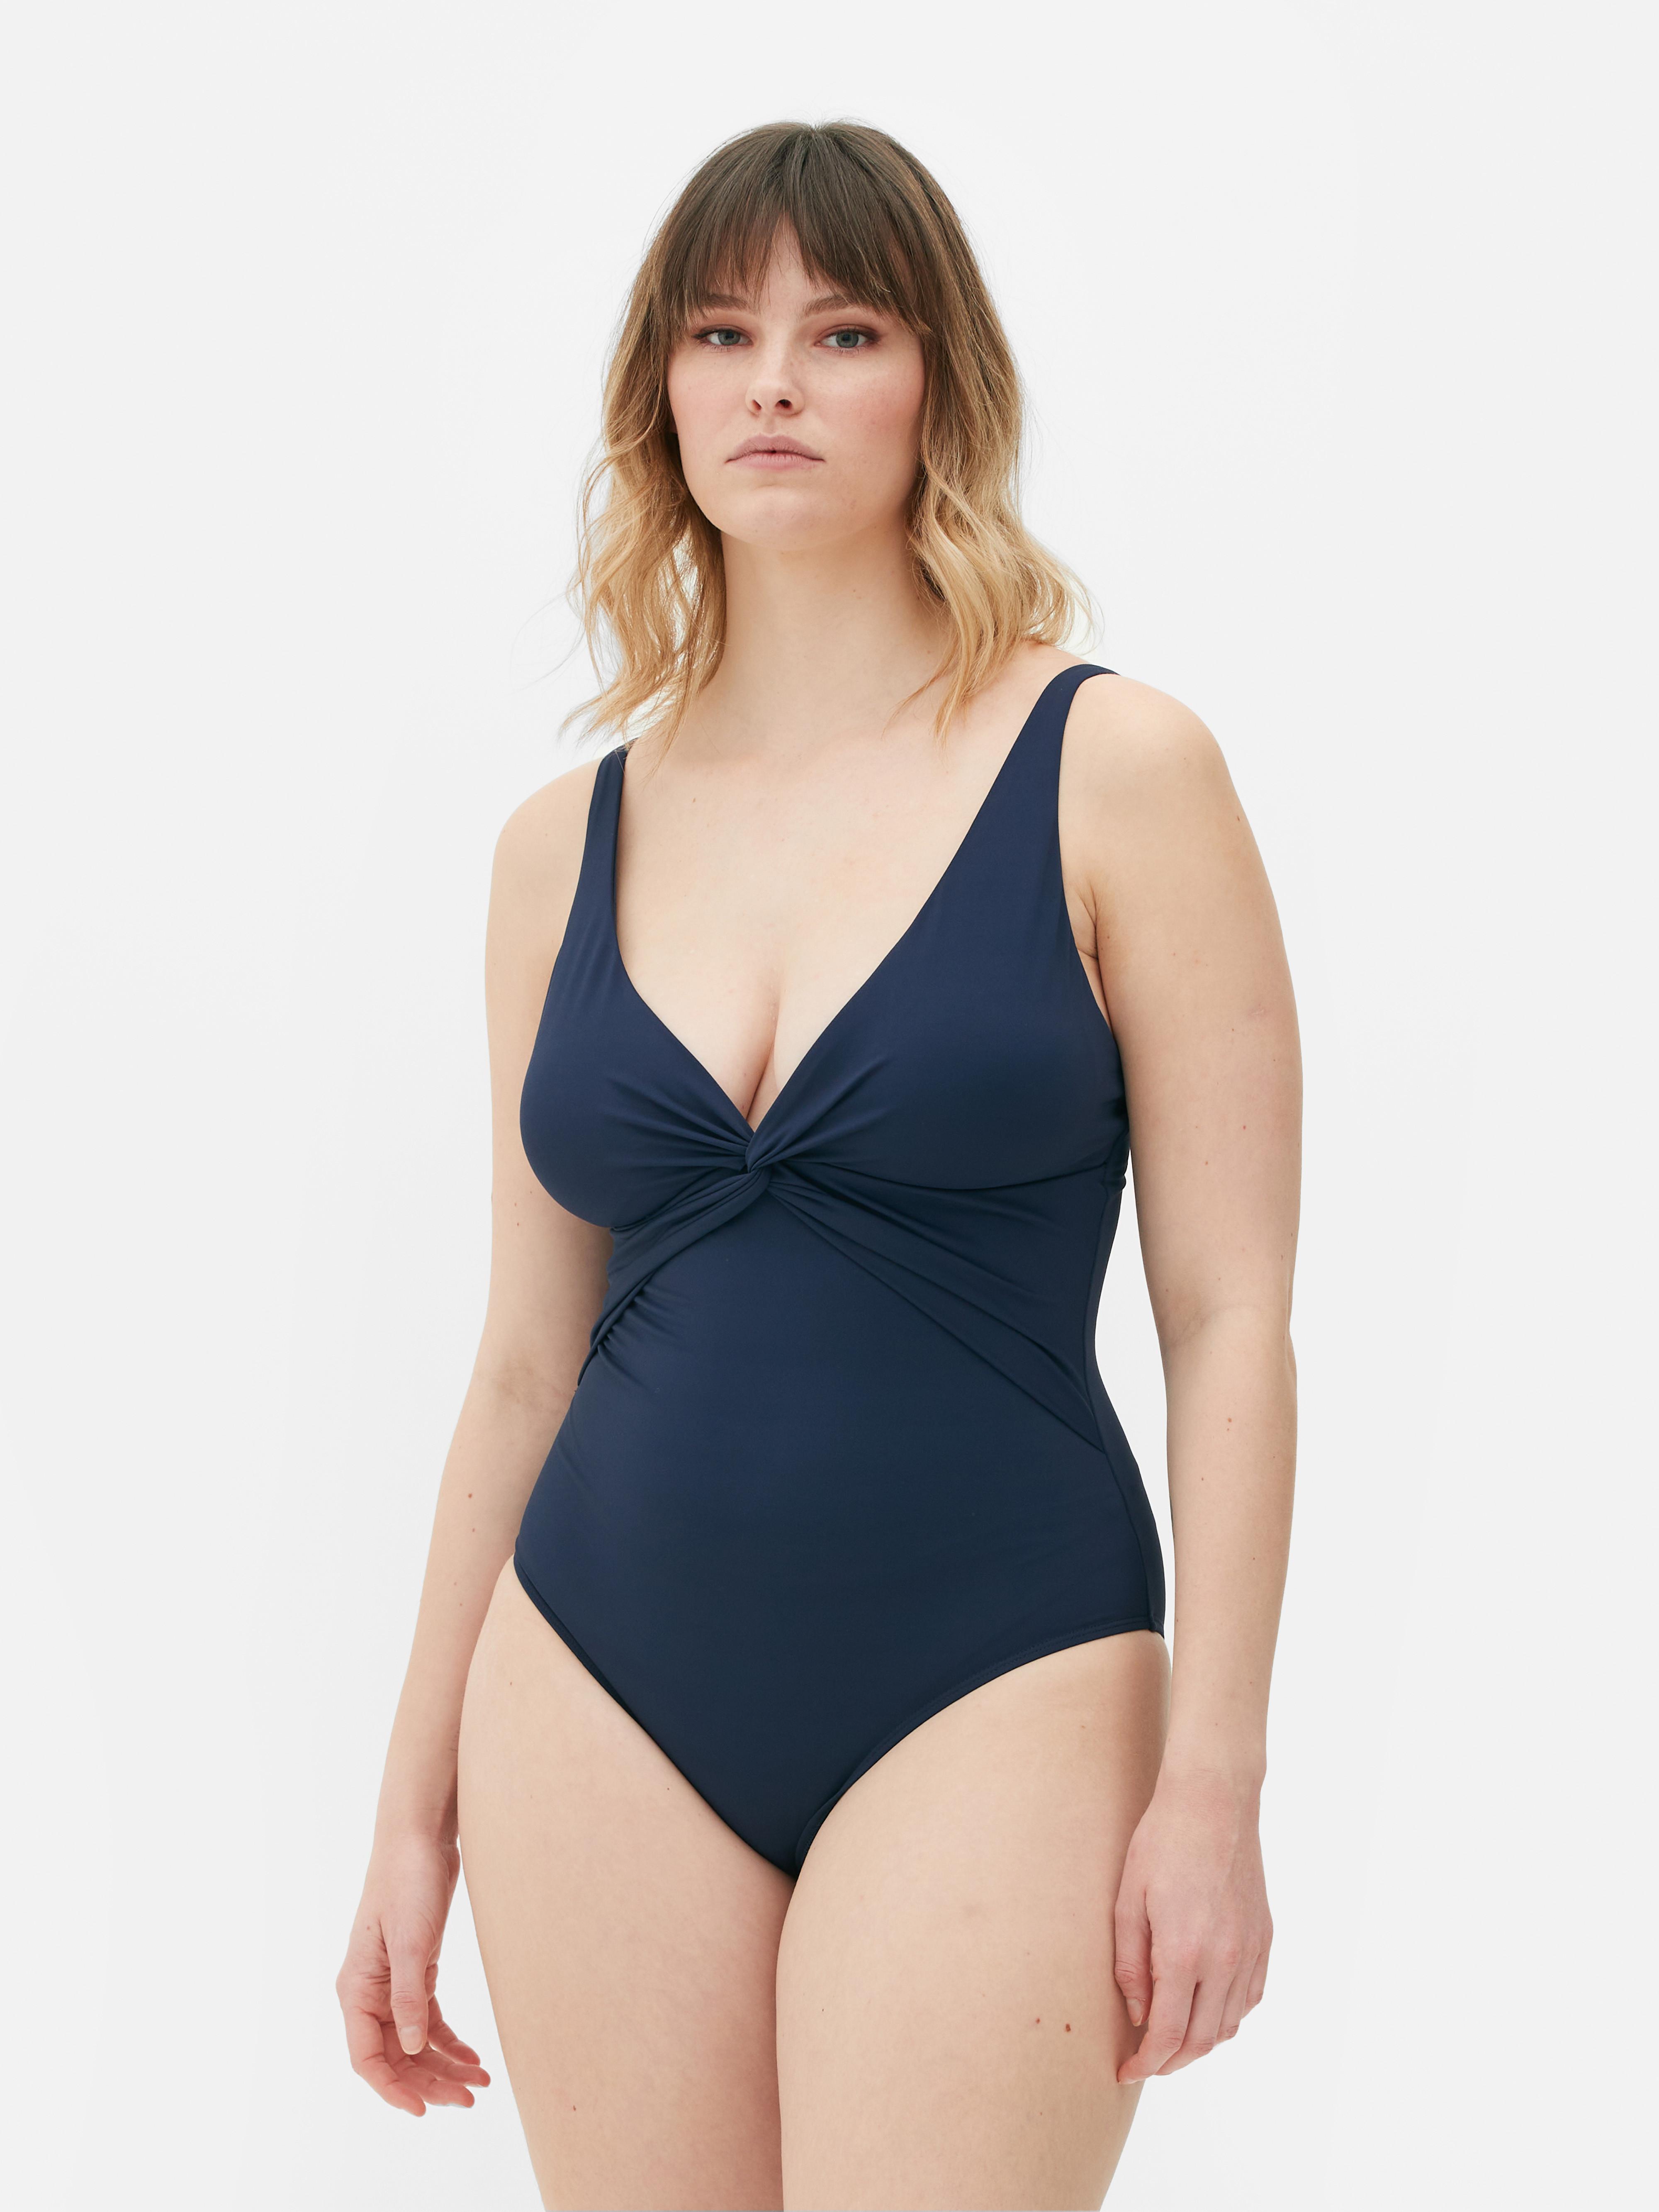 NEW $188 SPANX Sweetheart Ruched One-Piece Swimsuit [SZ 8 B/C Cup] #2237